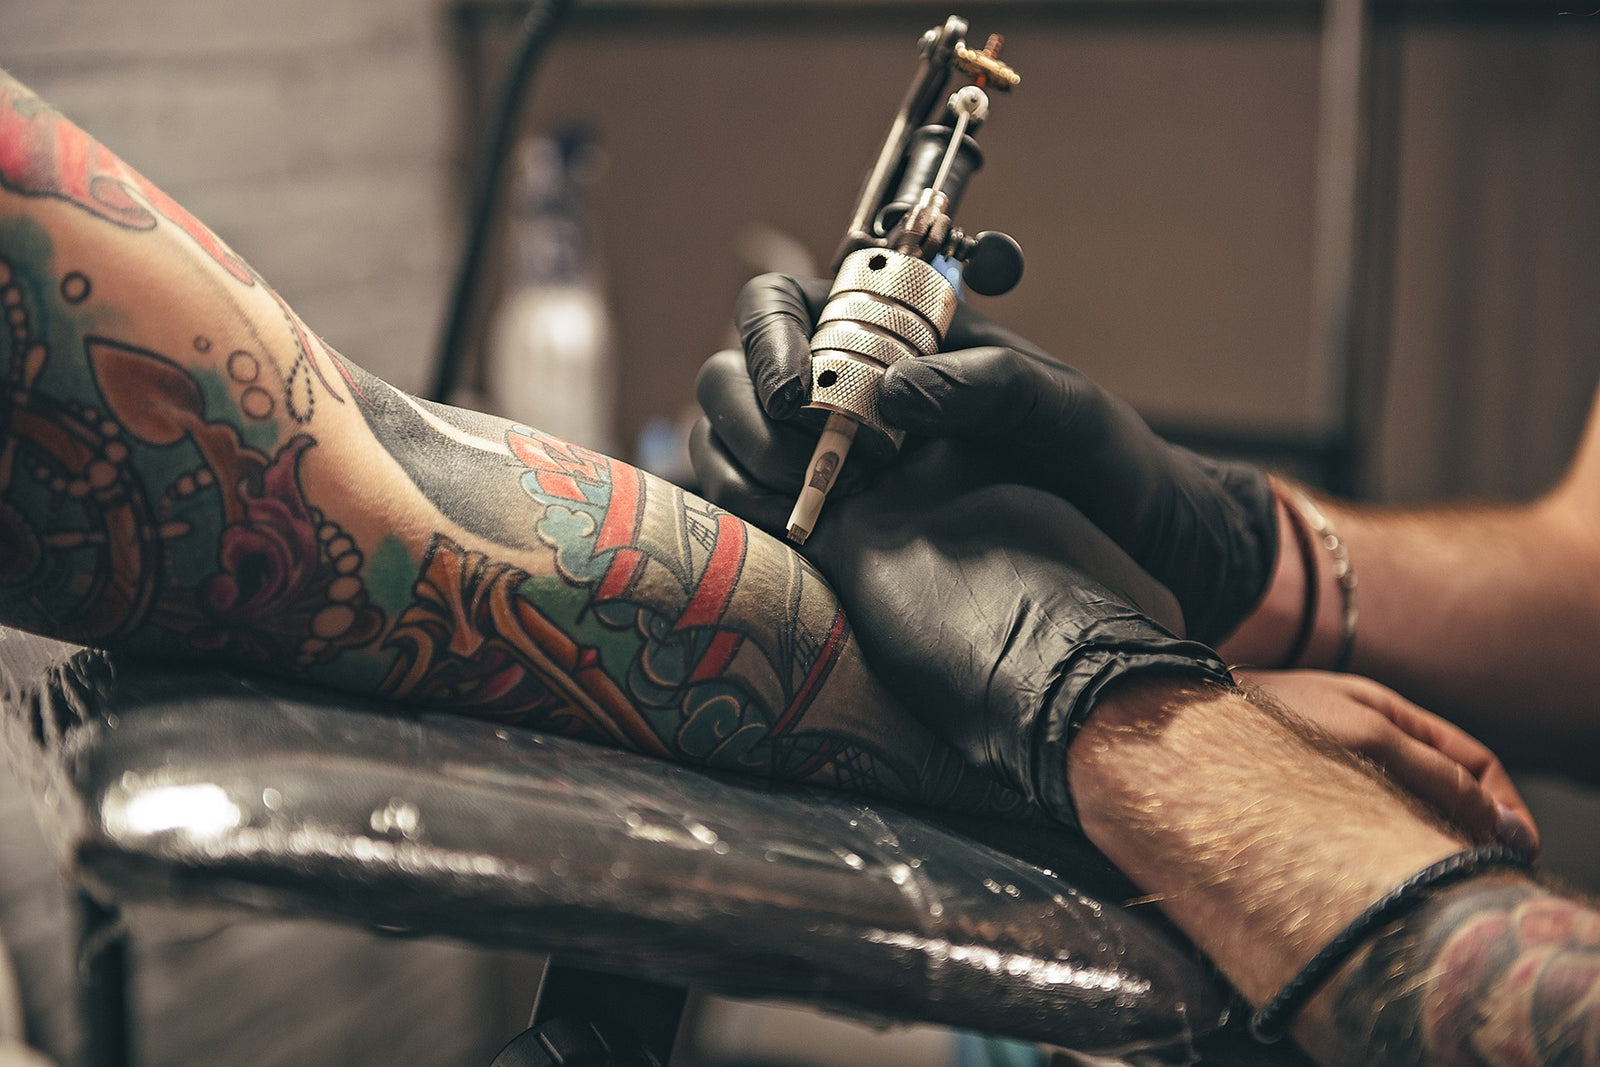 How to Care for a New Tattoo: 11 Awesome Tips - Marine Agency